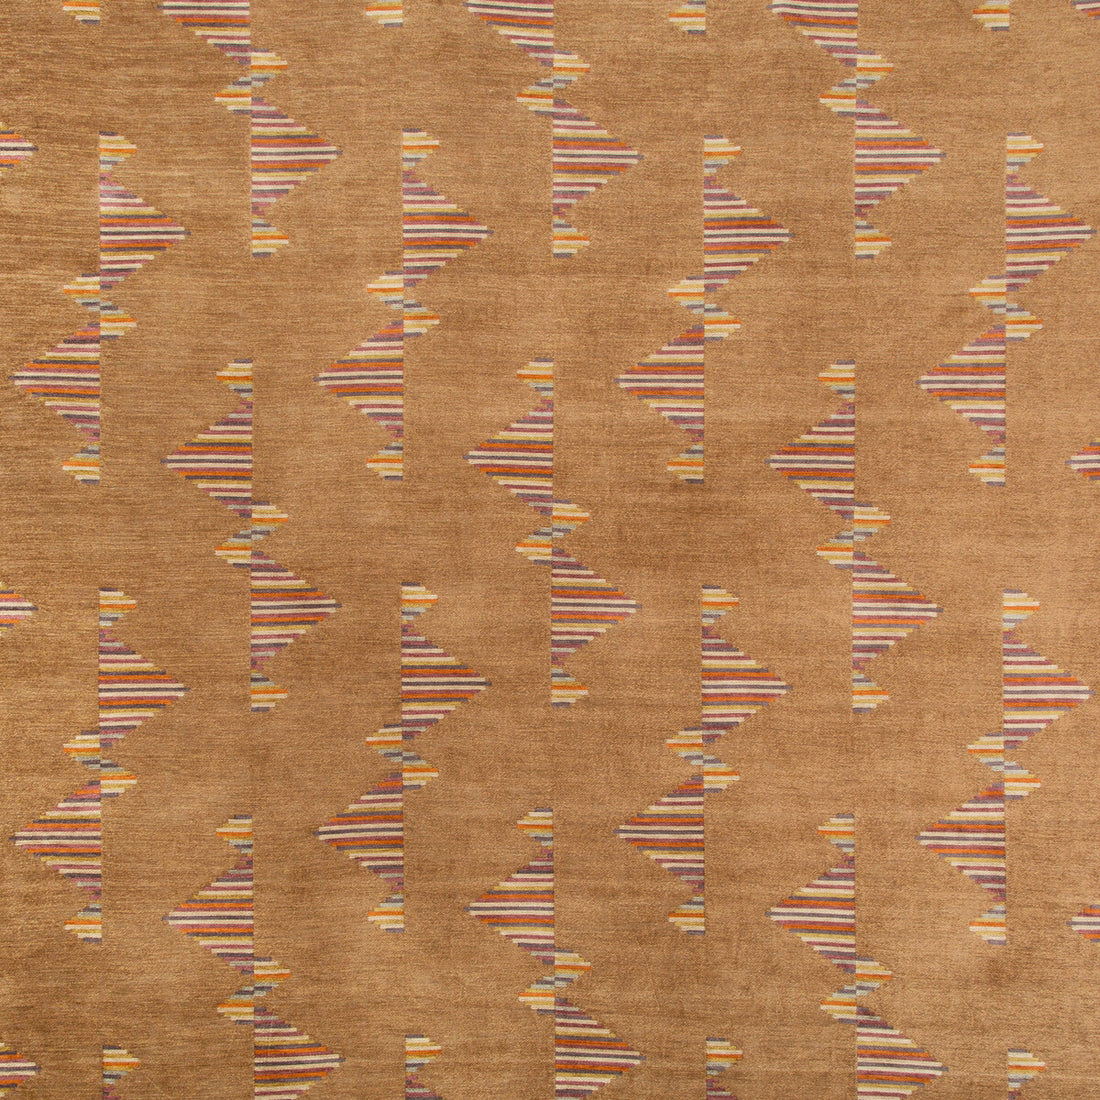 Arcade fabric in copper color - pattern GWF-3758.167.0 - by Lee Jofa Modern in the Kelly Wearstler V collection